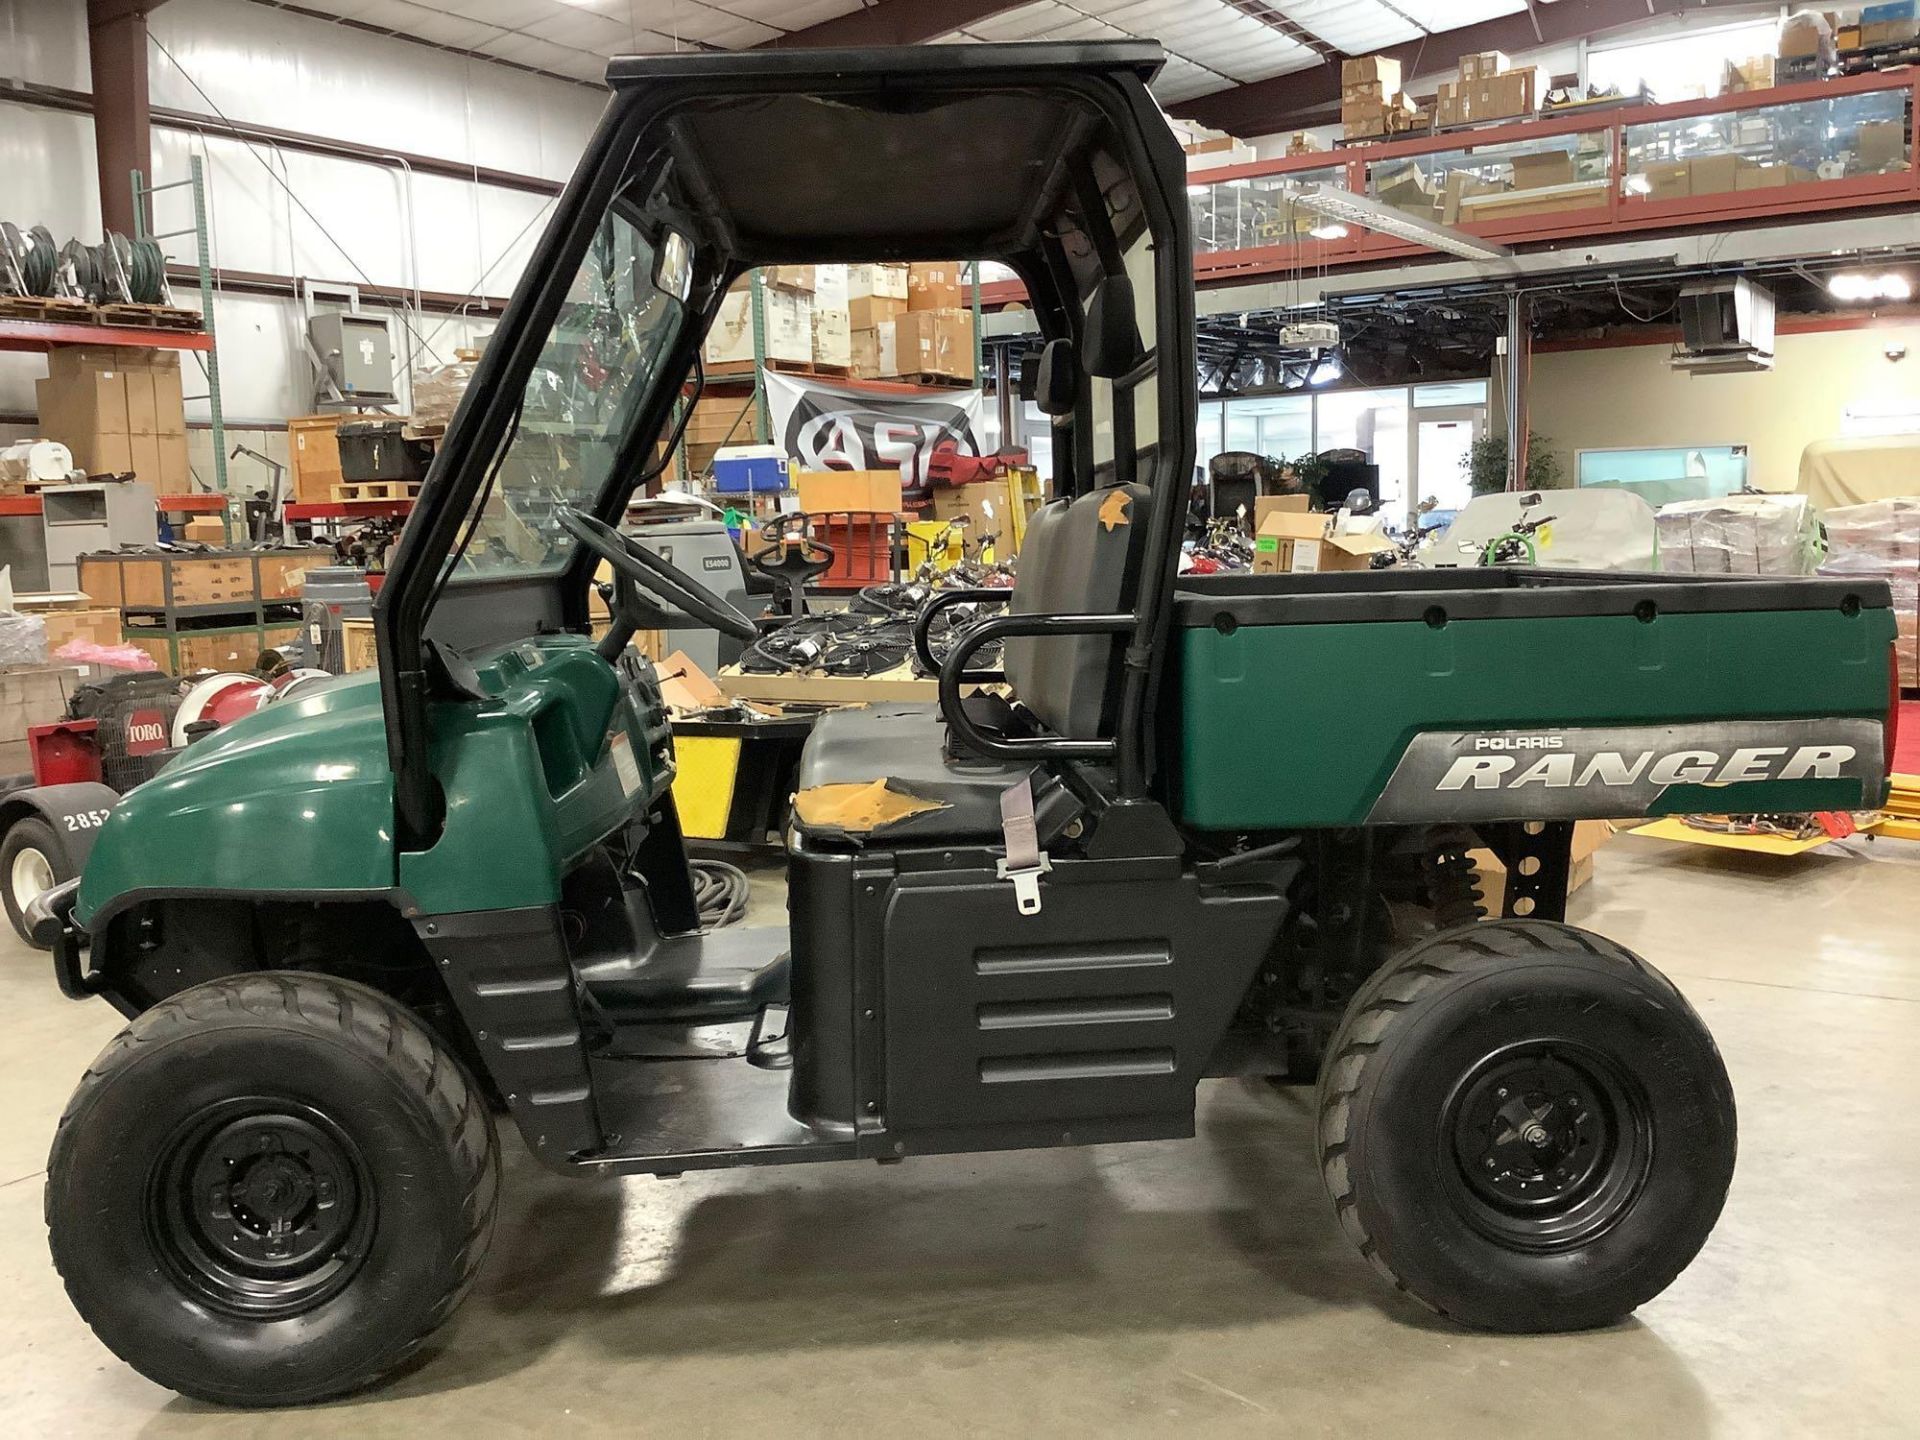 POLARIS RANGER 4x4, GAS POWERED, AWD, HITCH ON BACK, MANUAL DUMP BED, WINDSHIELD WIPER, RUNS AND OPE - Image 2 of 12